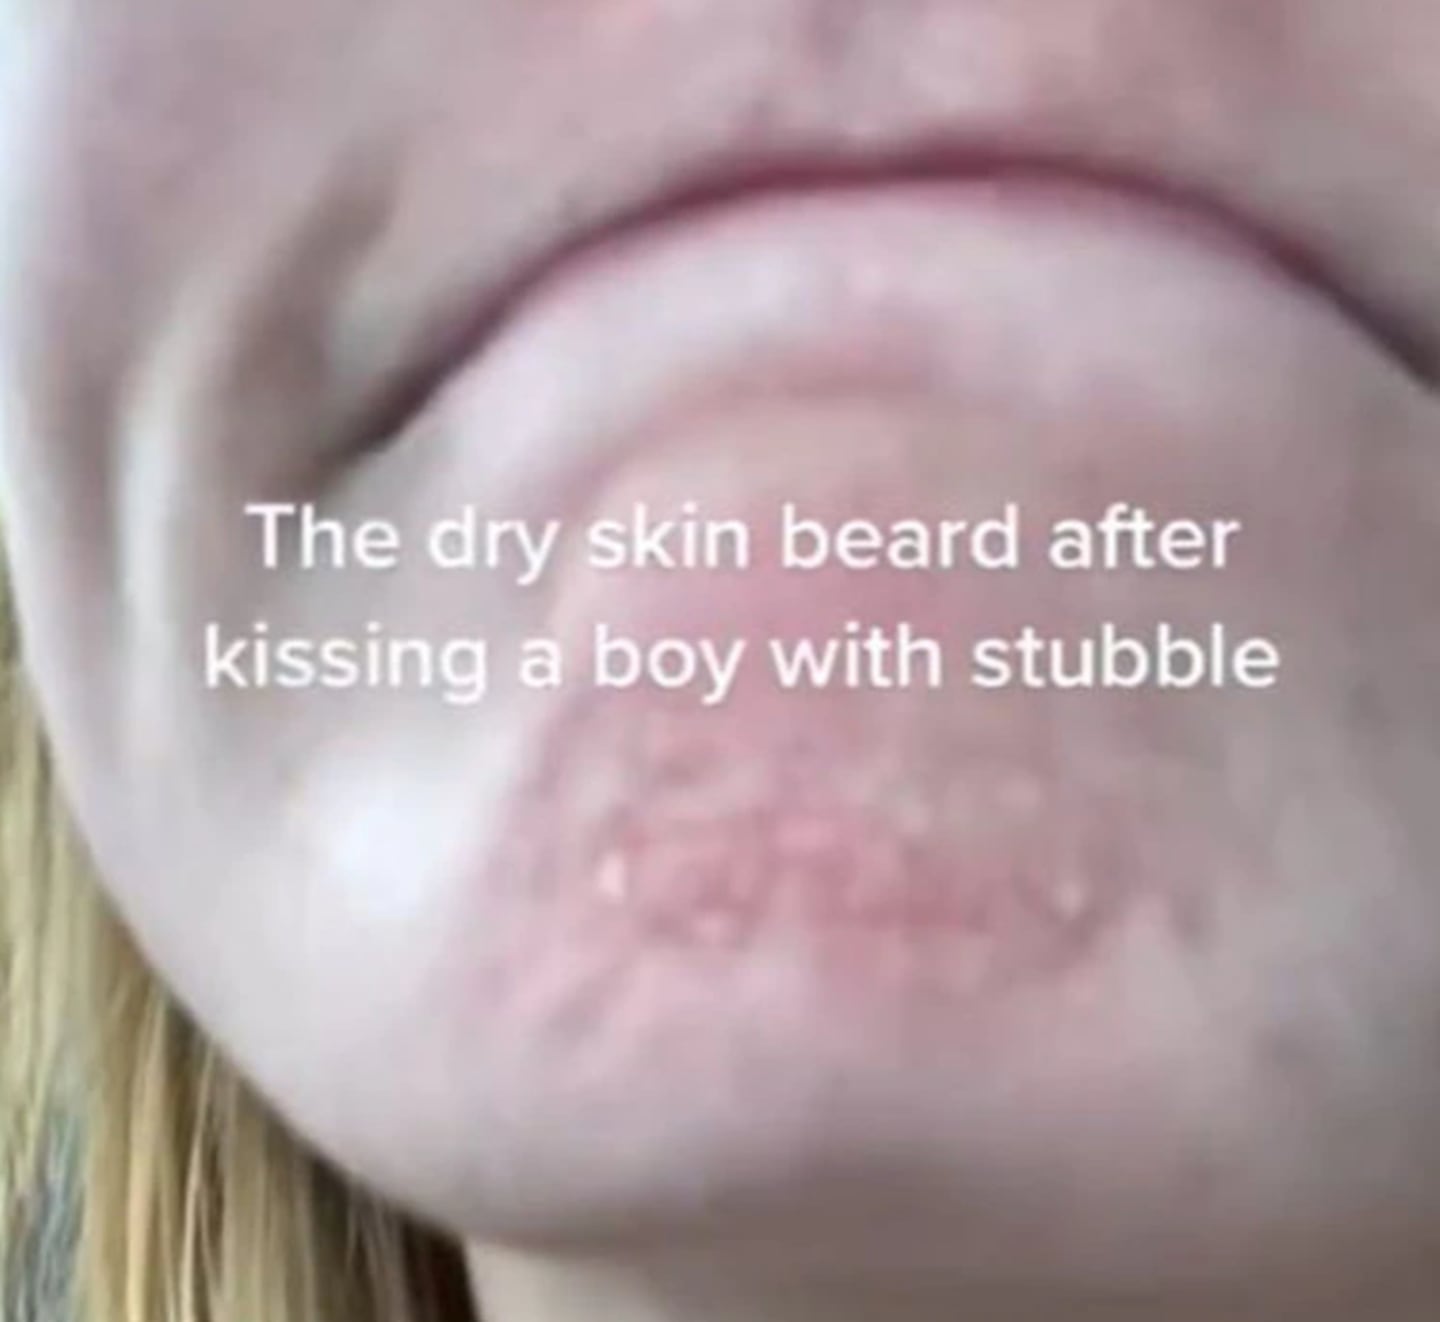 A TikTok video showing the dry, flaking skin women get after kissing men with stubble prompted one woman to share her horror pash story. Photo / TikTok